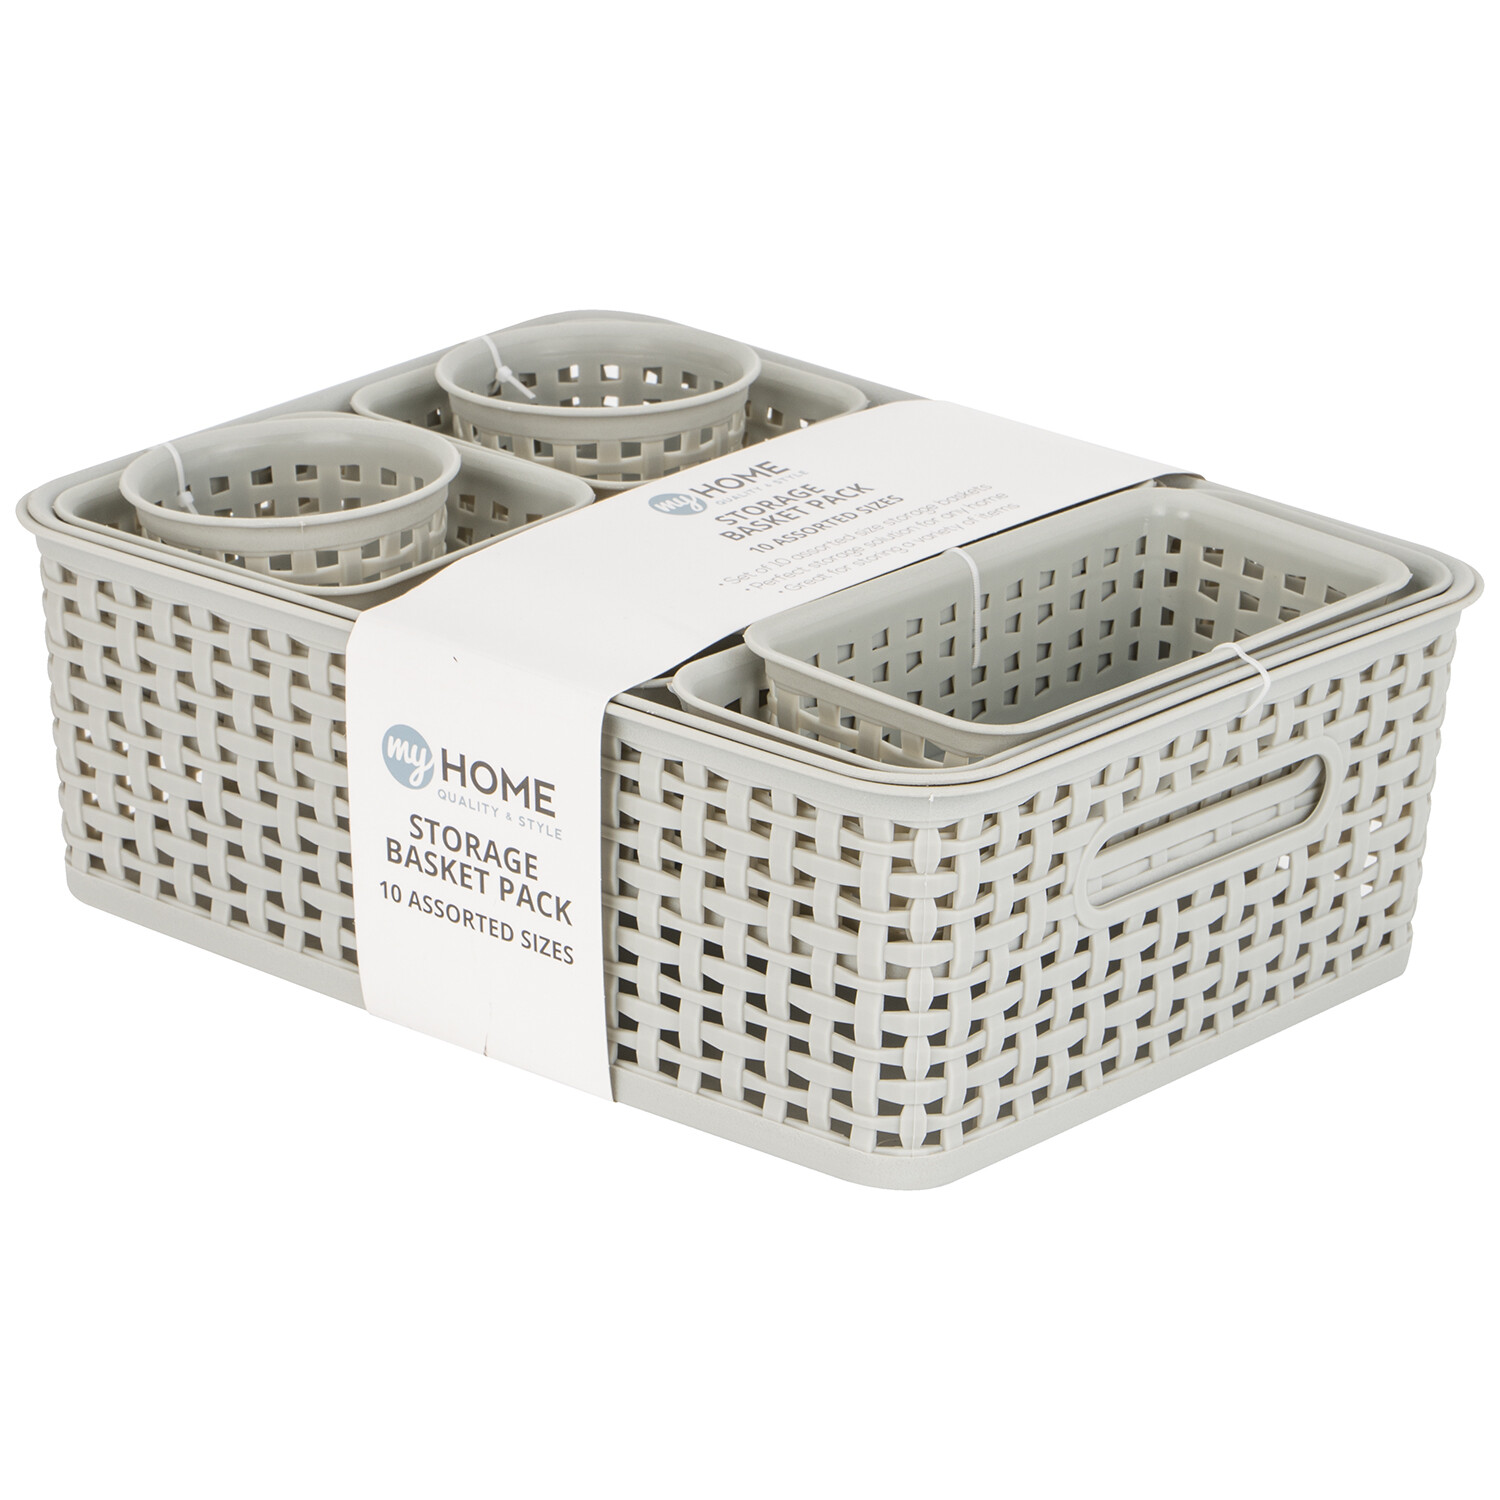 My Home Storage Baskets in Assorted Sizes 10 Pack Image